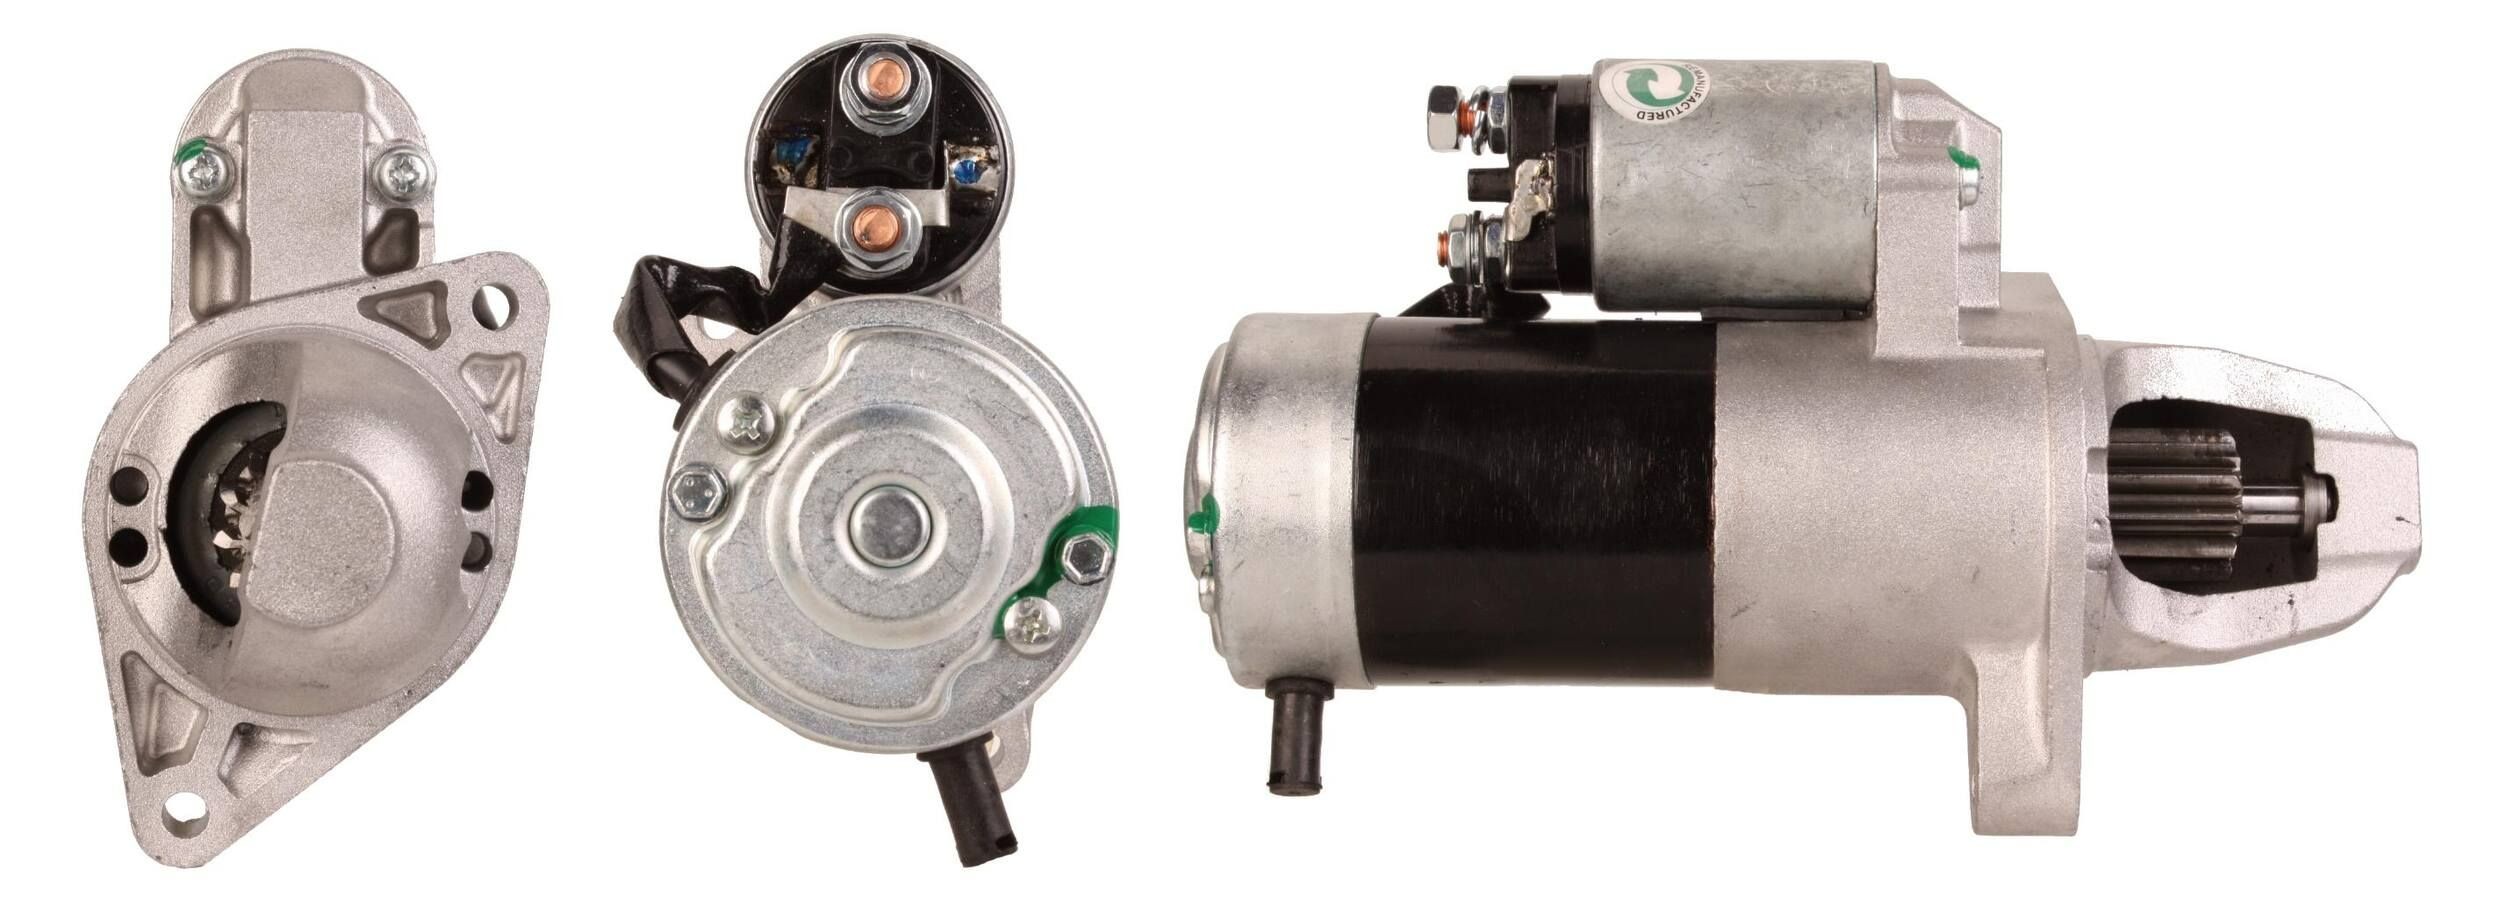 LUCAS LRS02395 Starter motor SMART experience and price